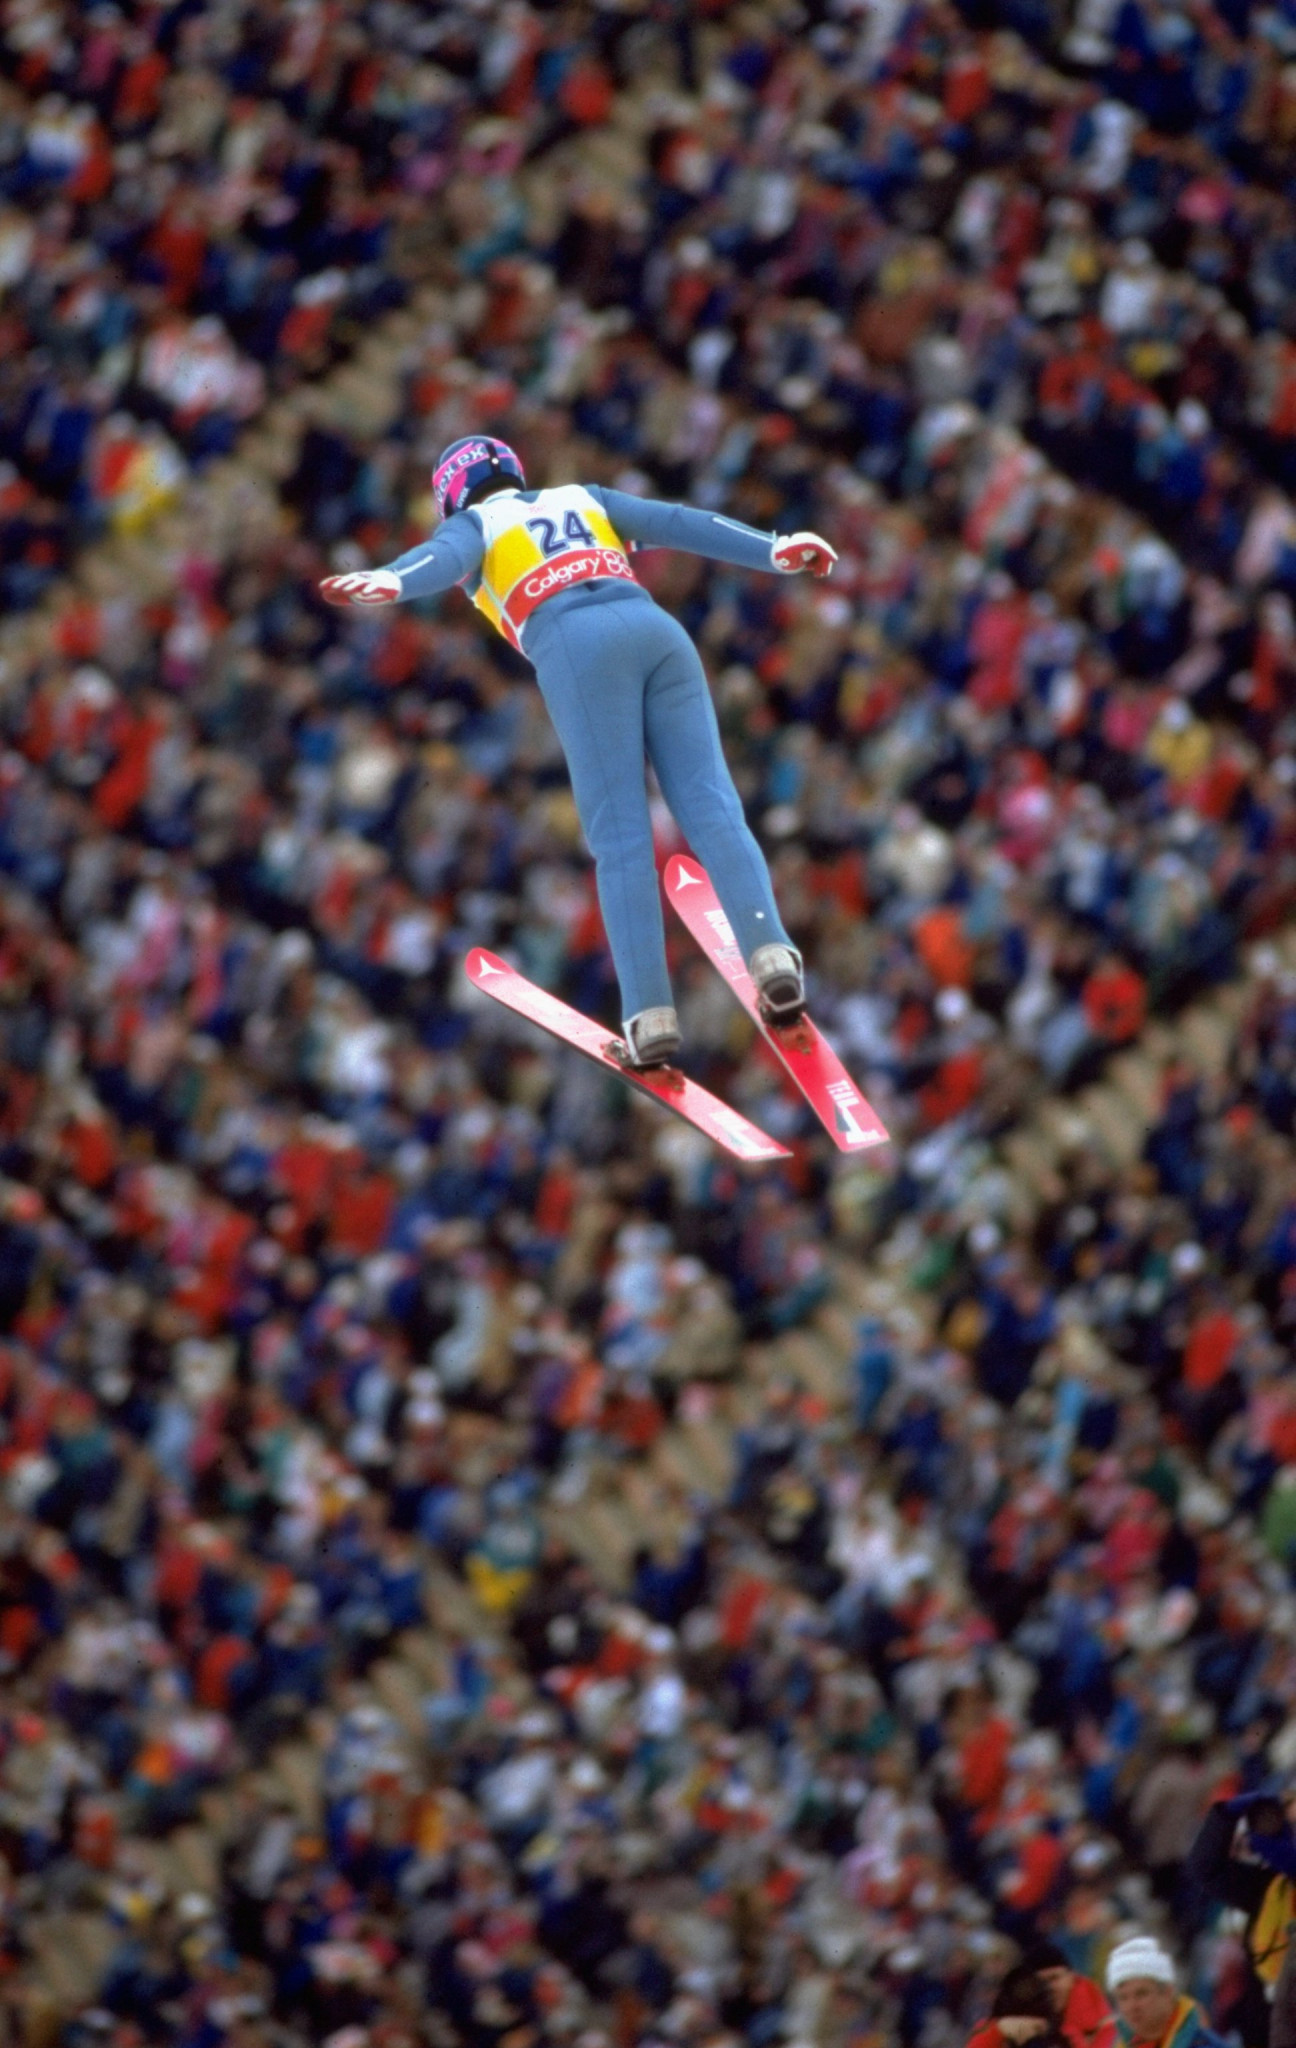 The Eagle has not quite landed - Eddie Edwards competing on the 70m hill at Calgary 1988, where is lack of experience was clear for all to see and led to new rules being introduced ©Getty Images